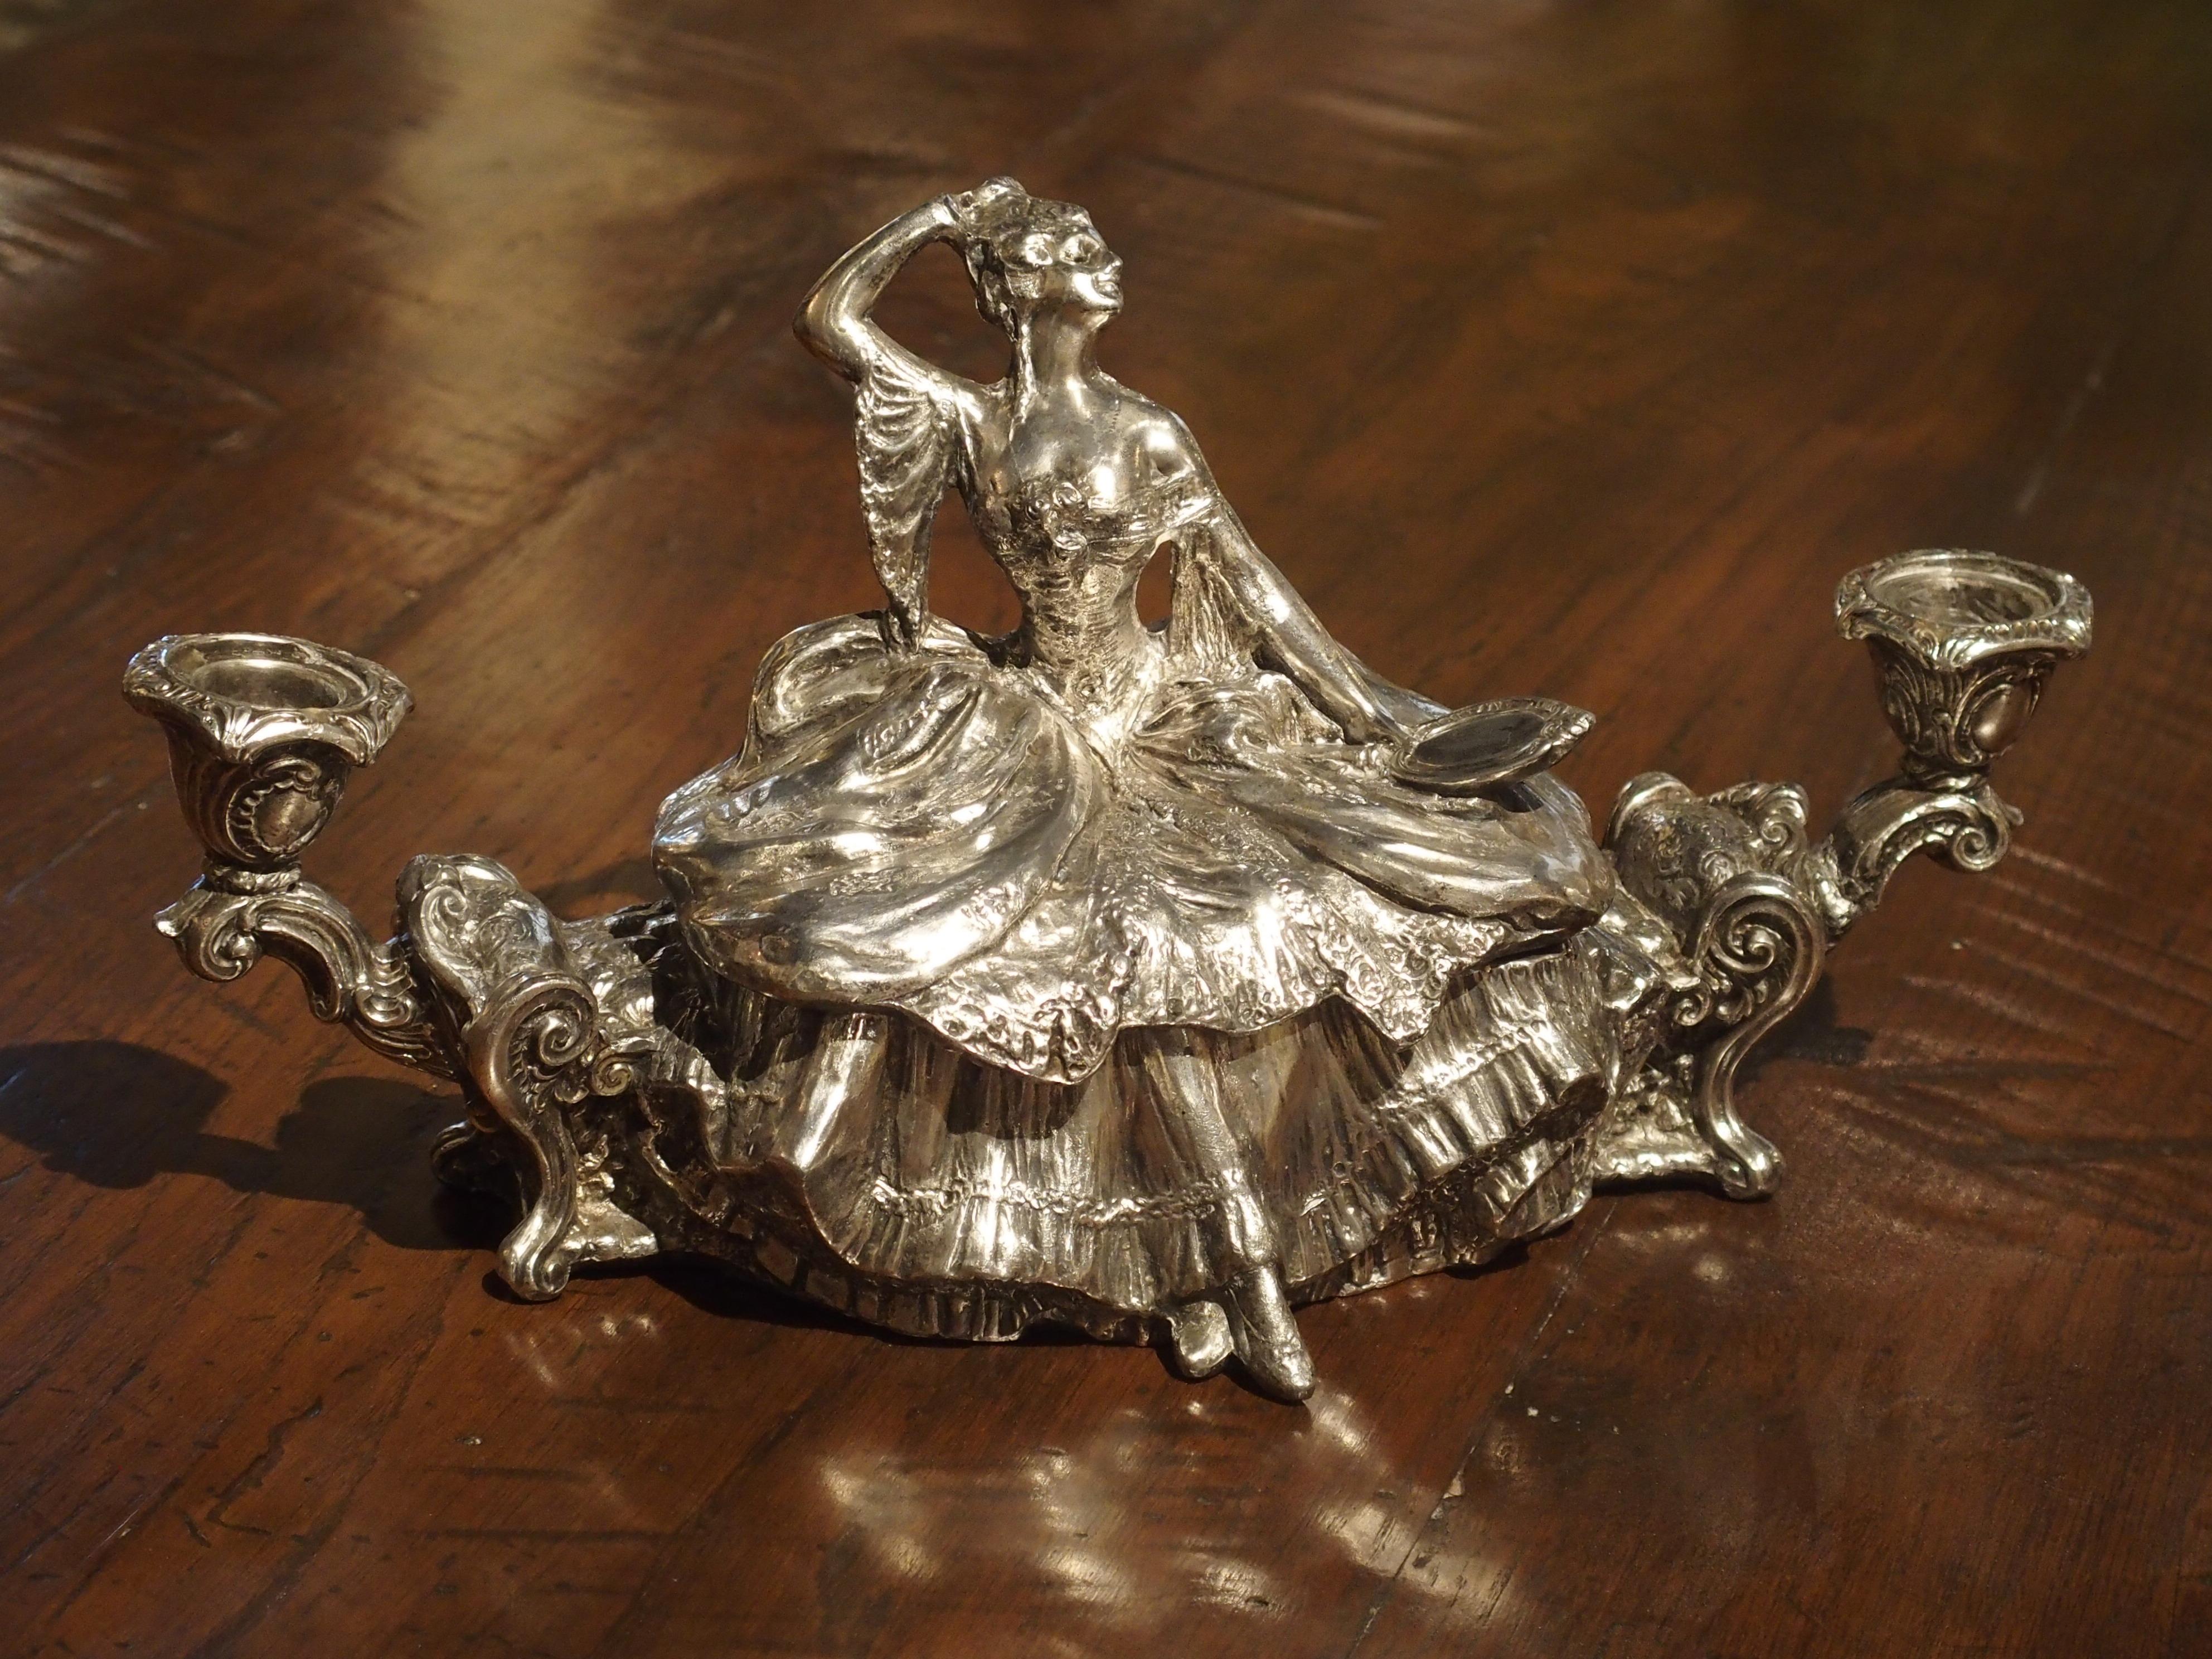 This is an early 1900s decorative silvered table or jewelry box. The top (once hinged), is removable, and there are C-scroll candleholders at each end. The subject is a woman seated on a banquette looking into a hand mirror. She wears a large